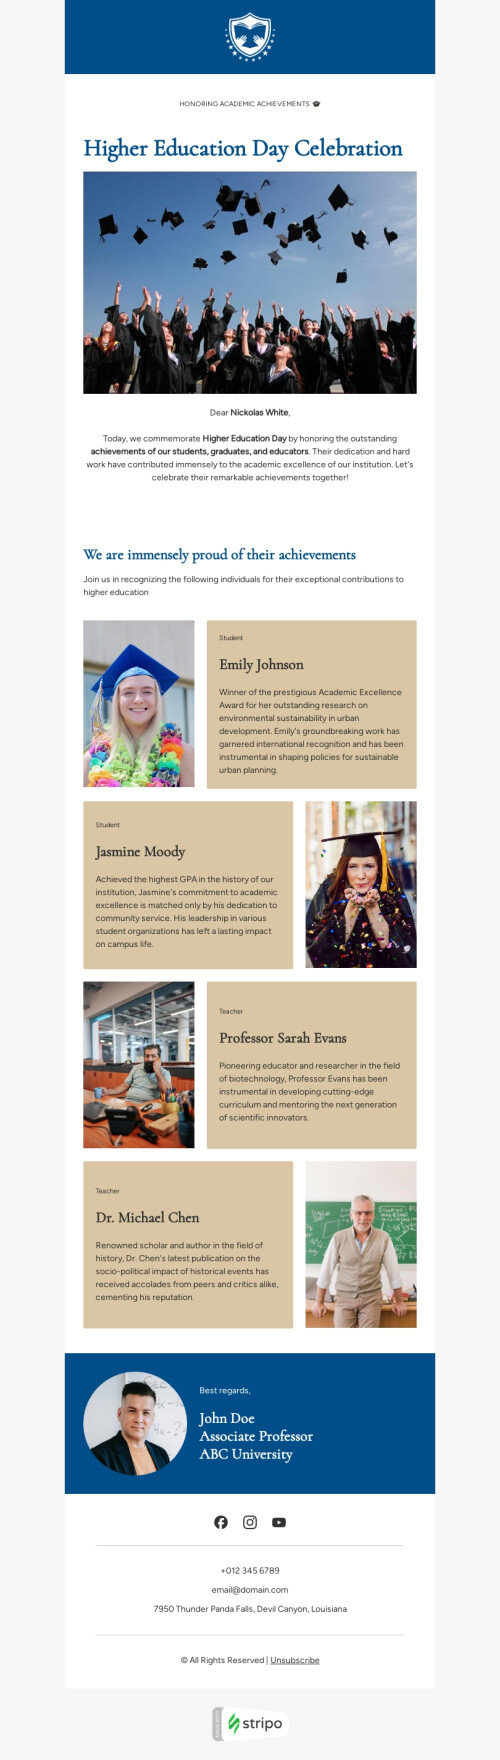 Higher Education Day email template "Honoring Academic Achievements" for education industry desktop view